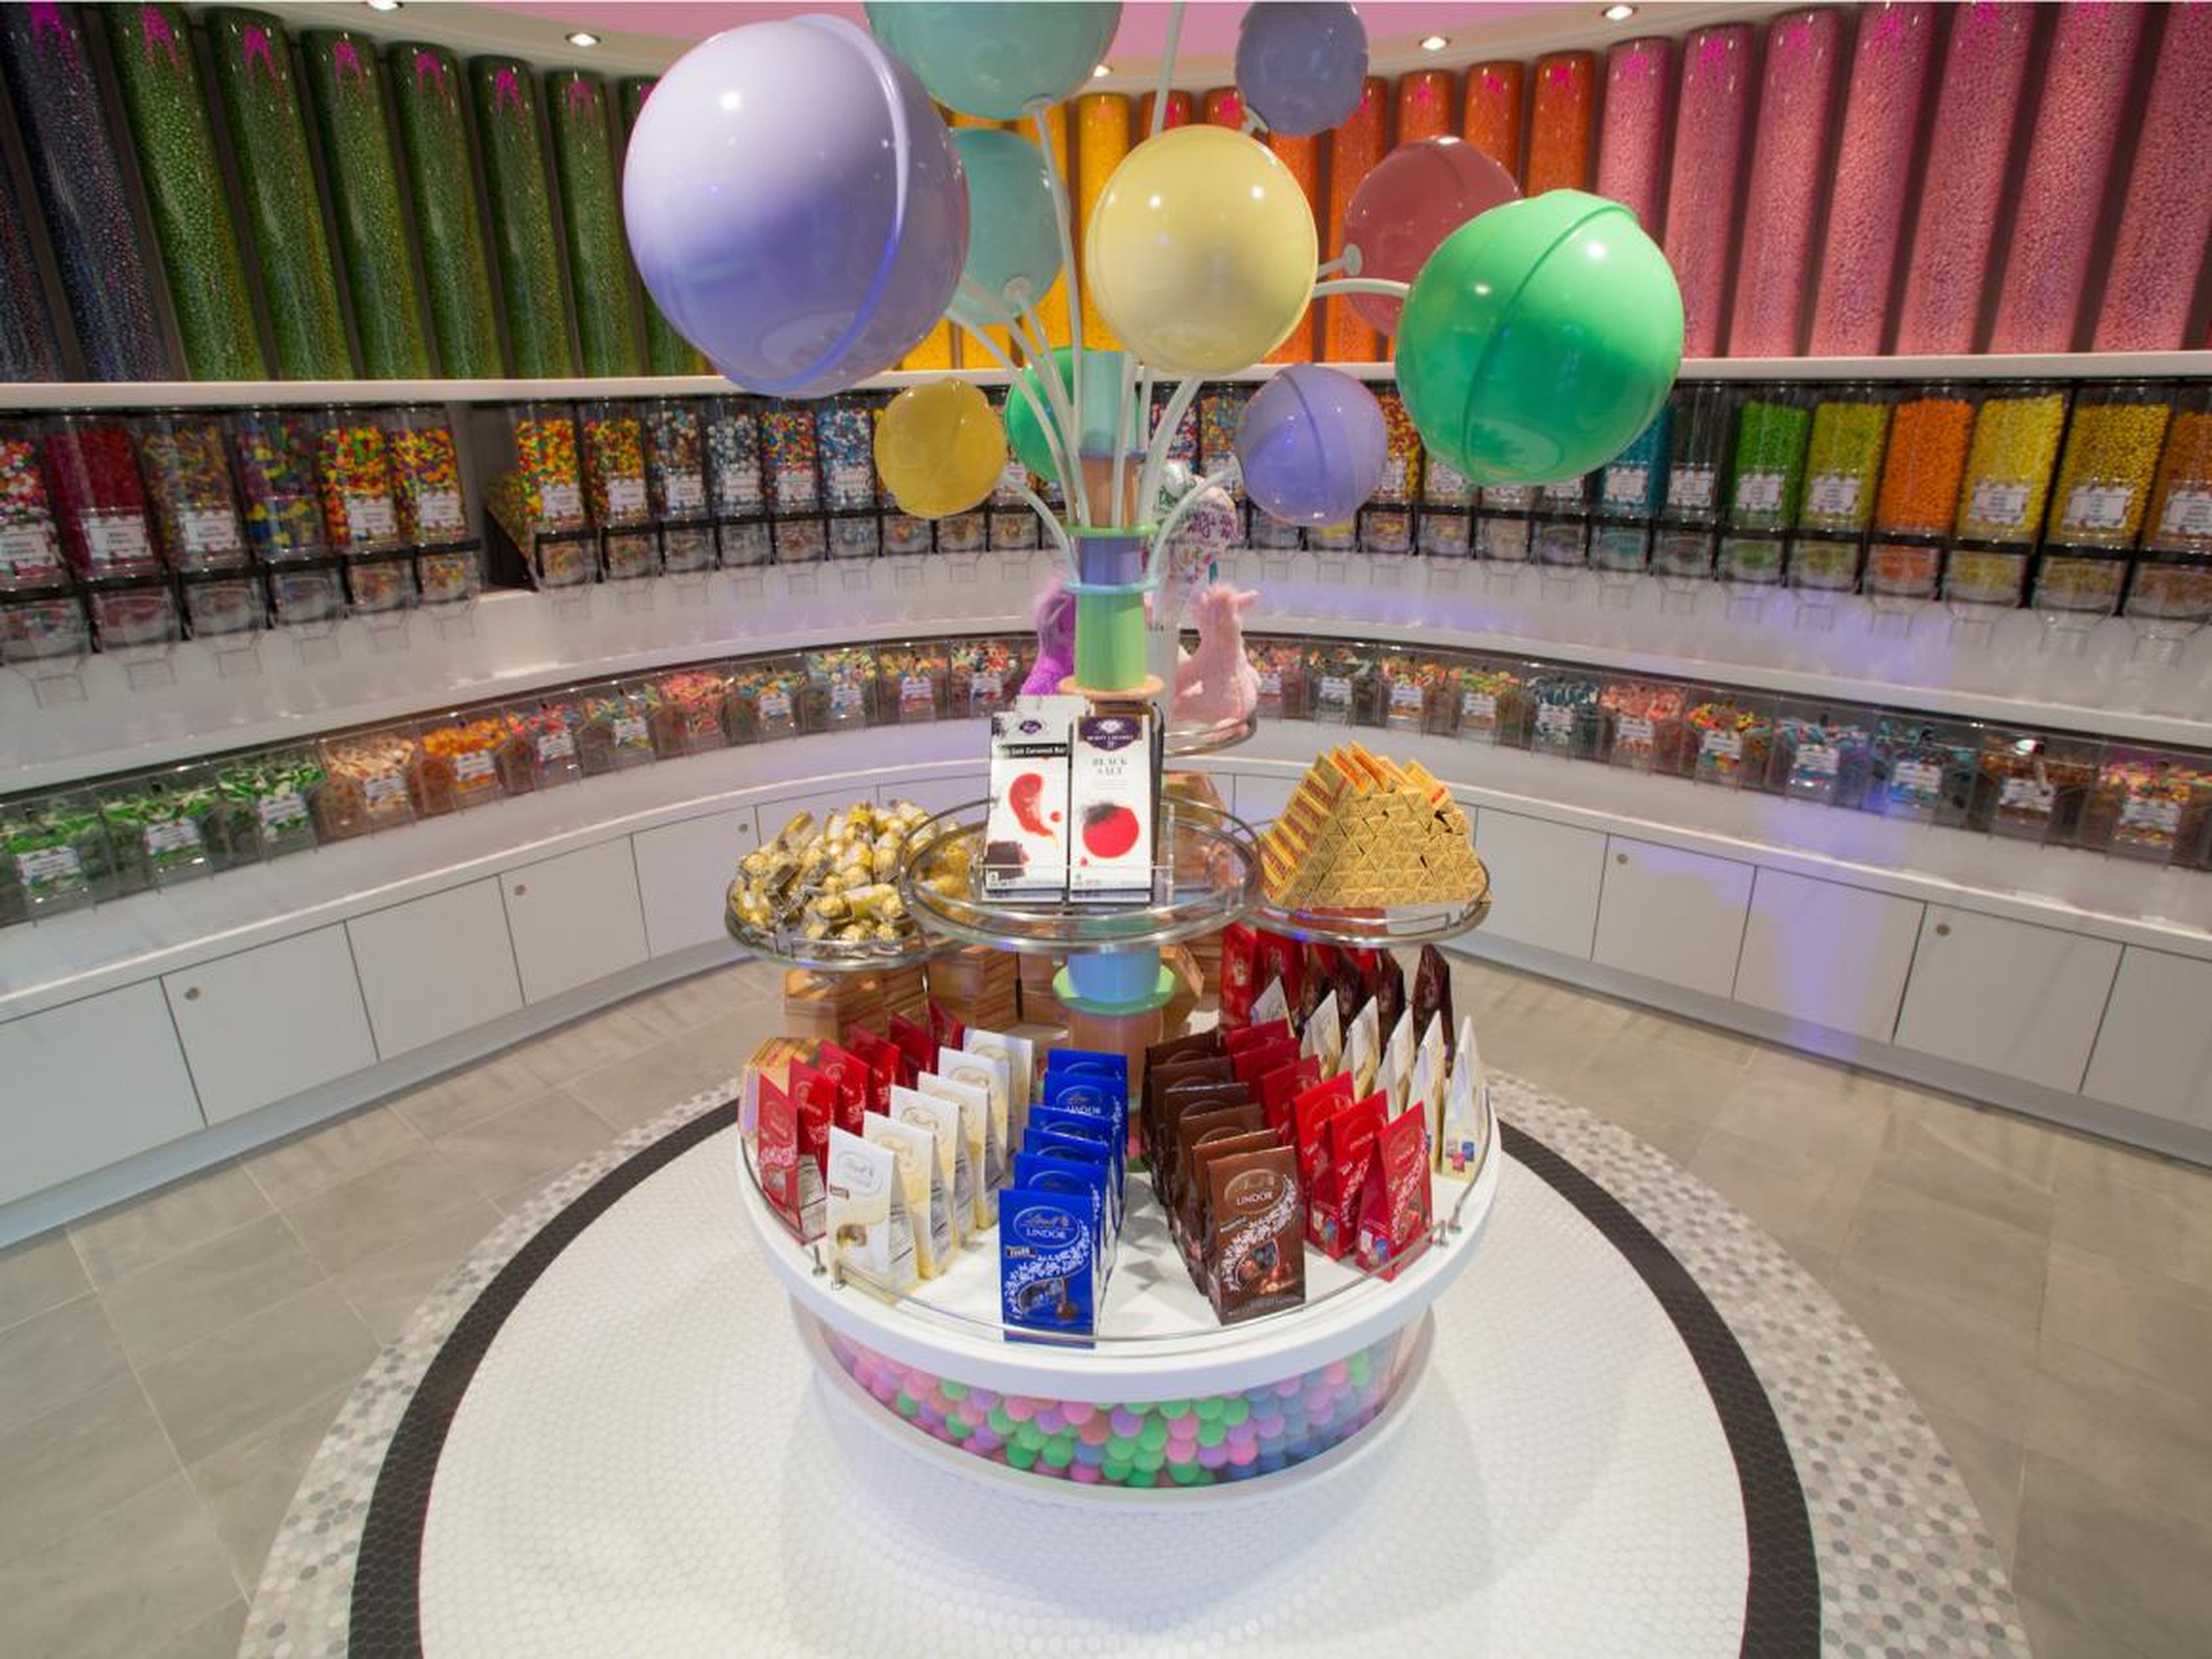 There's a candy store, if you want to indulge your sweet tooth.